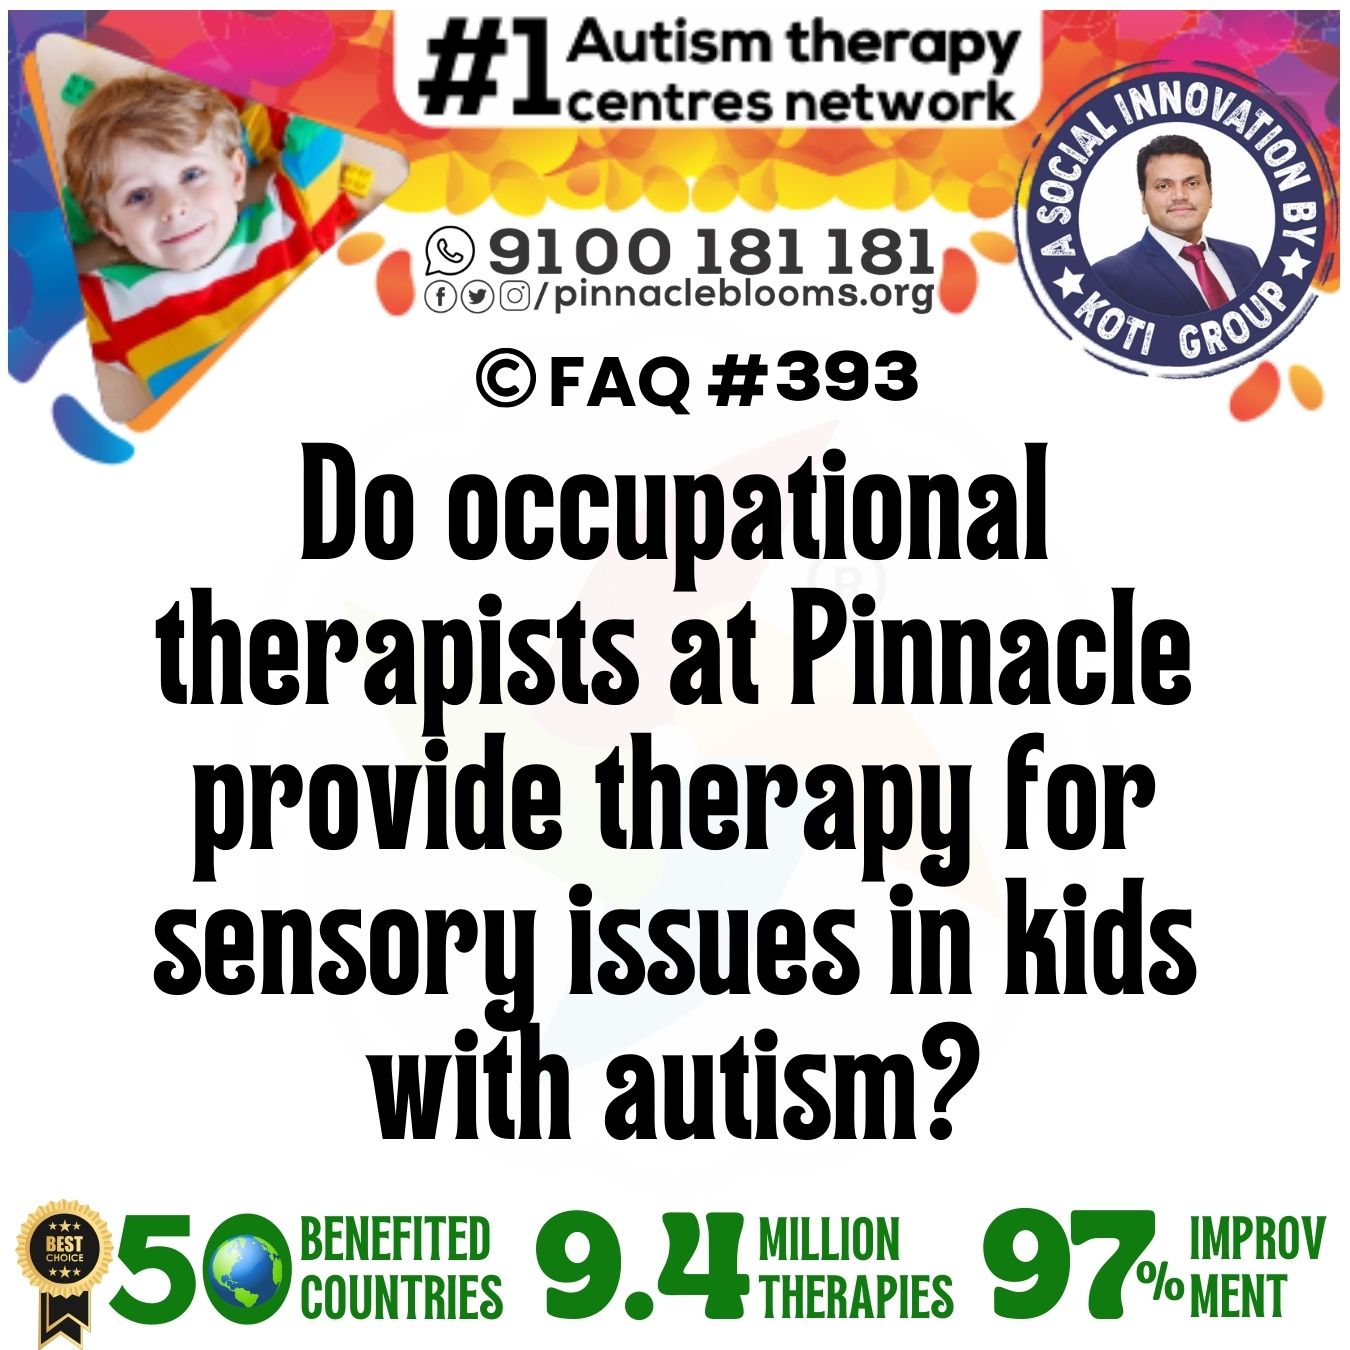 Do occupational therapists at Pinnacle provide therapy for sensory issues in kids with autism?